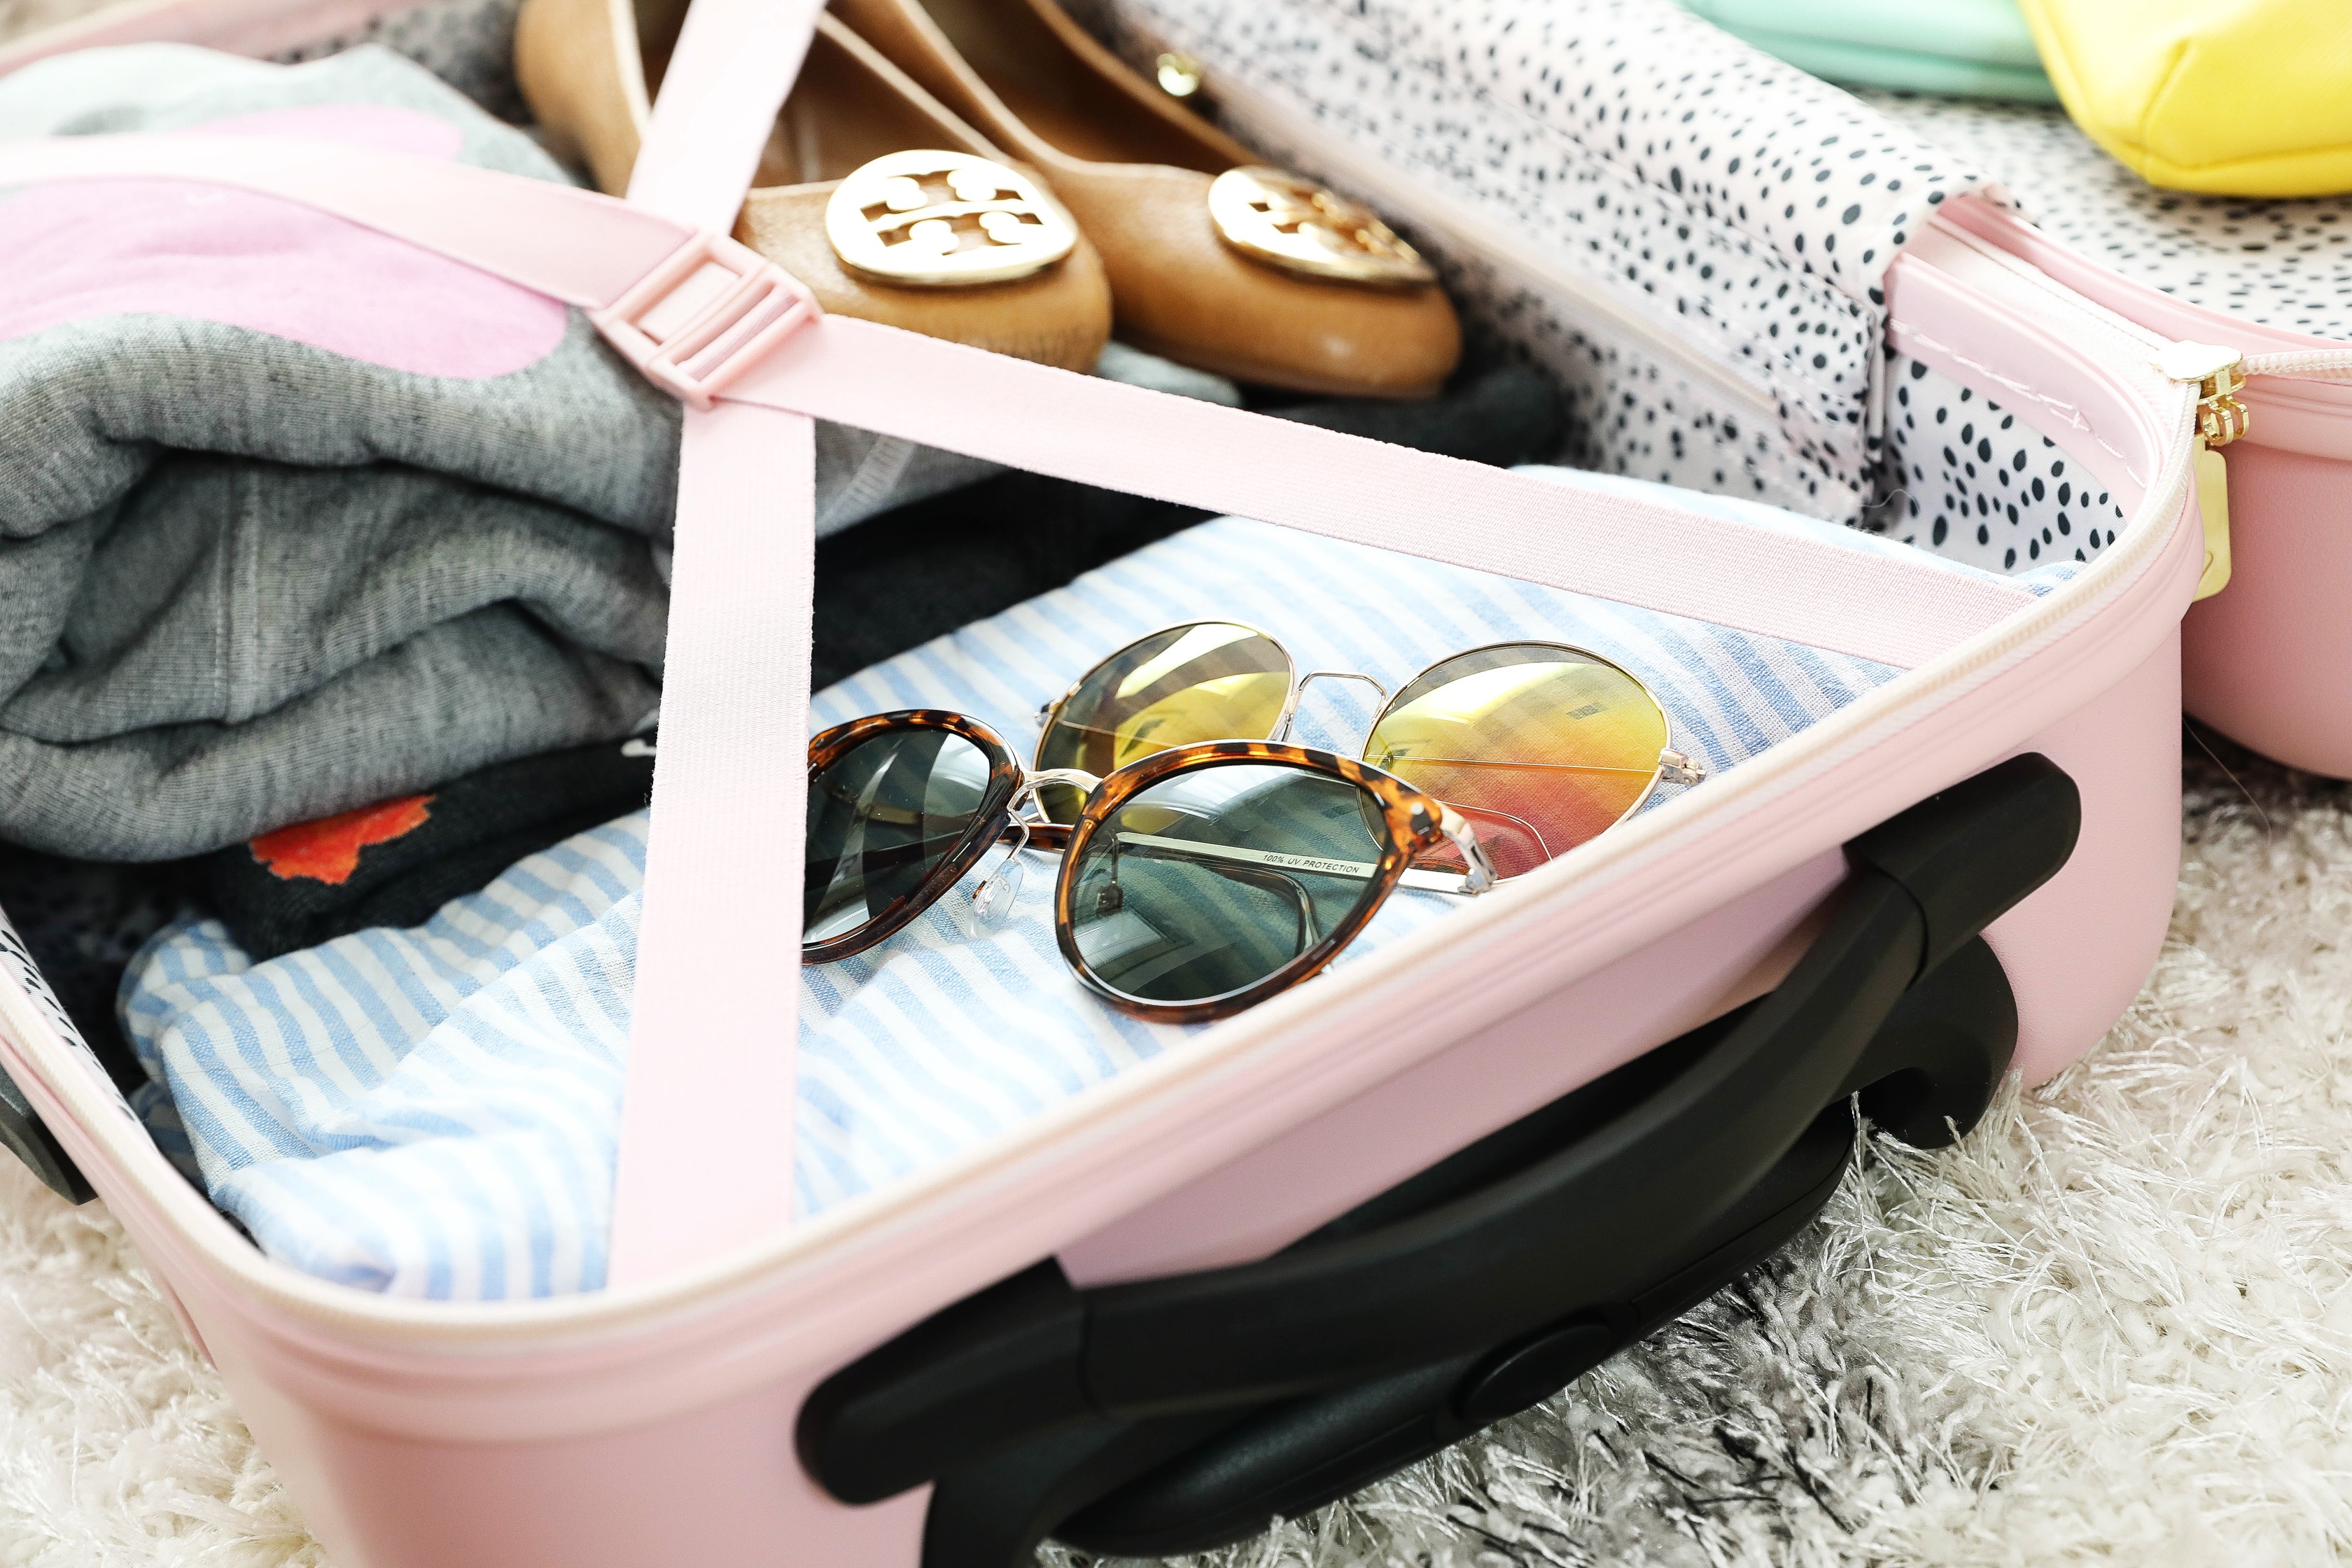 Packing tips and travel tips for frequent flyers! How to travel easier plus cute suitcases. On the blog Daily Dose of Charm by Lauren Lindmark dailydoseofcharm.com